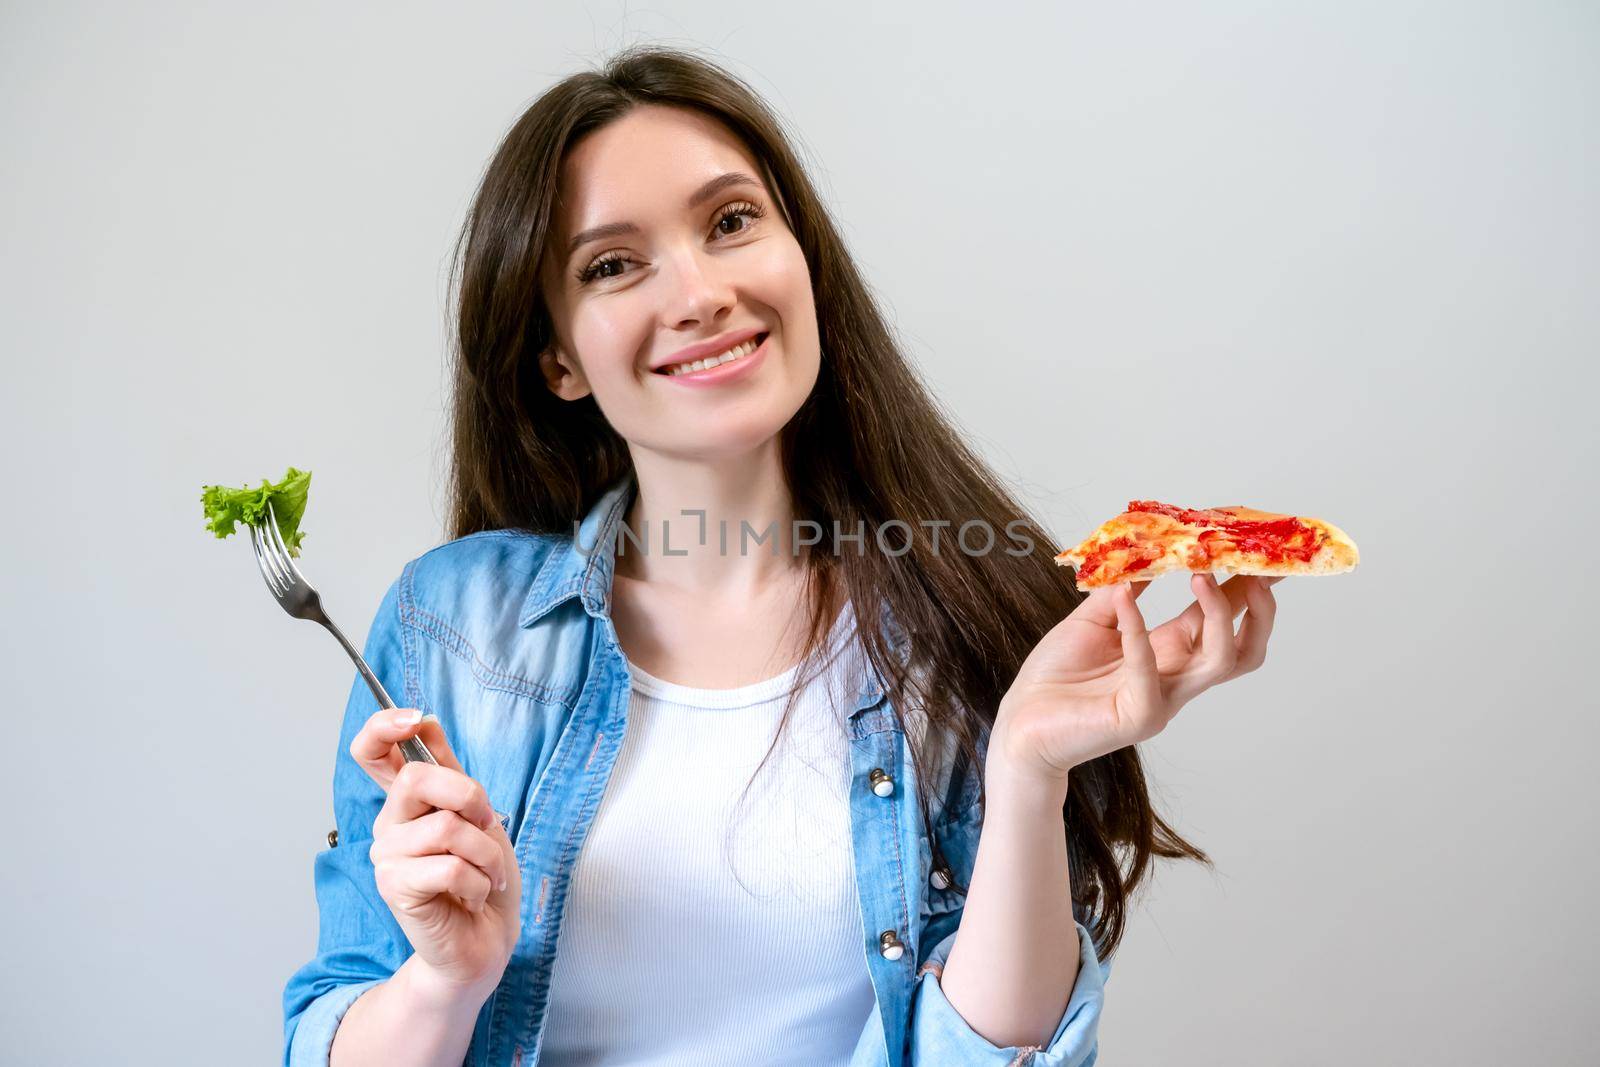 Young smiling woman chooses what to eat, pizza or salad by Svetlana_Belozerova